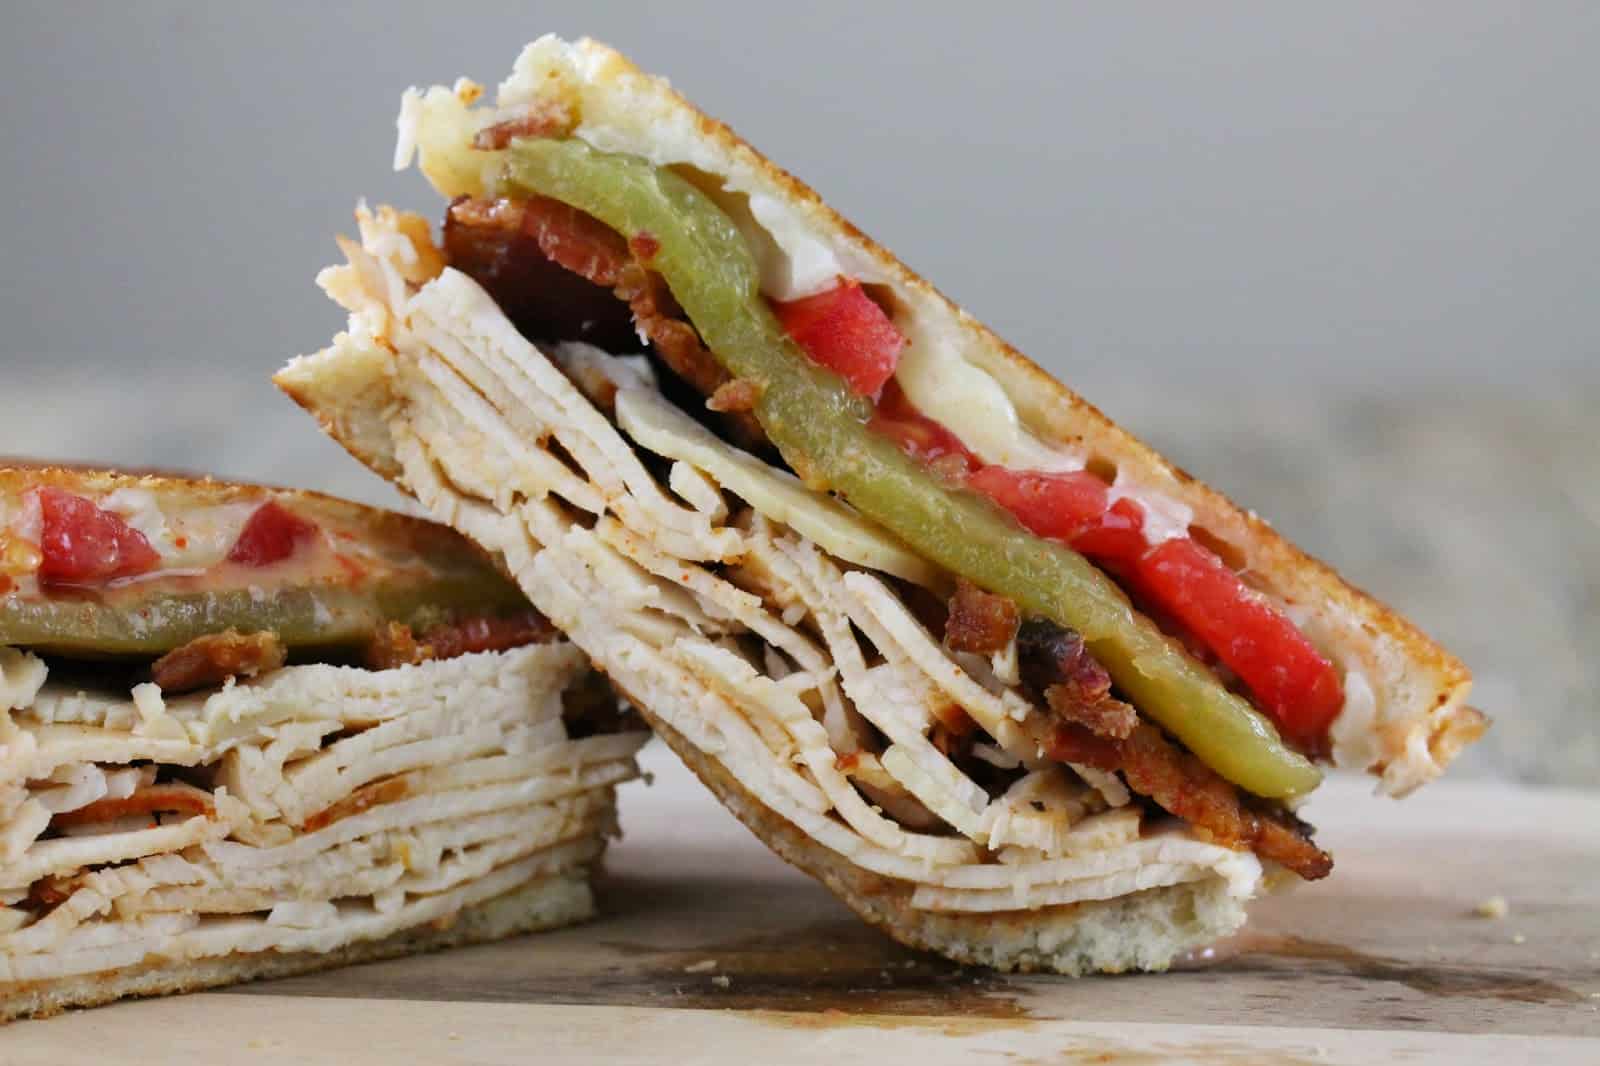 Baja Turkey Club cut in half and stacked on a countertop.